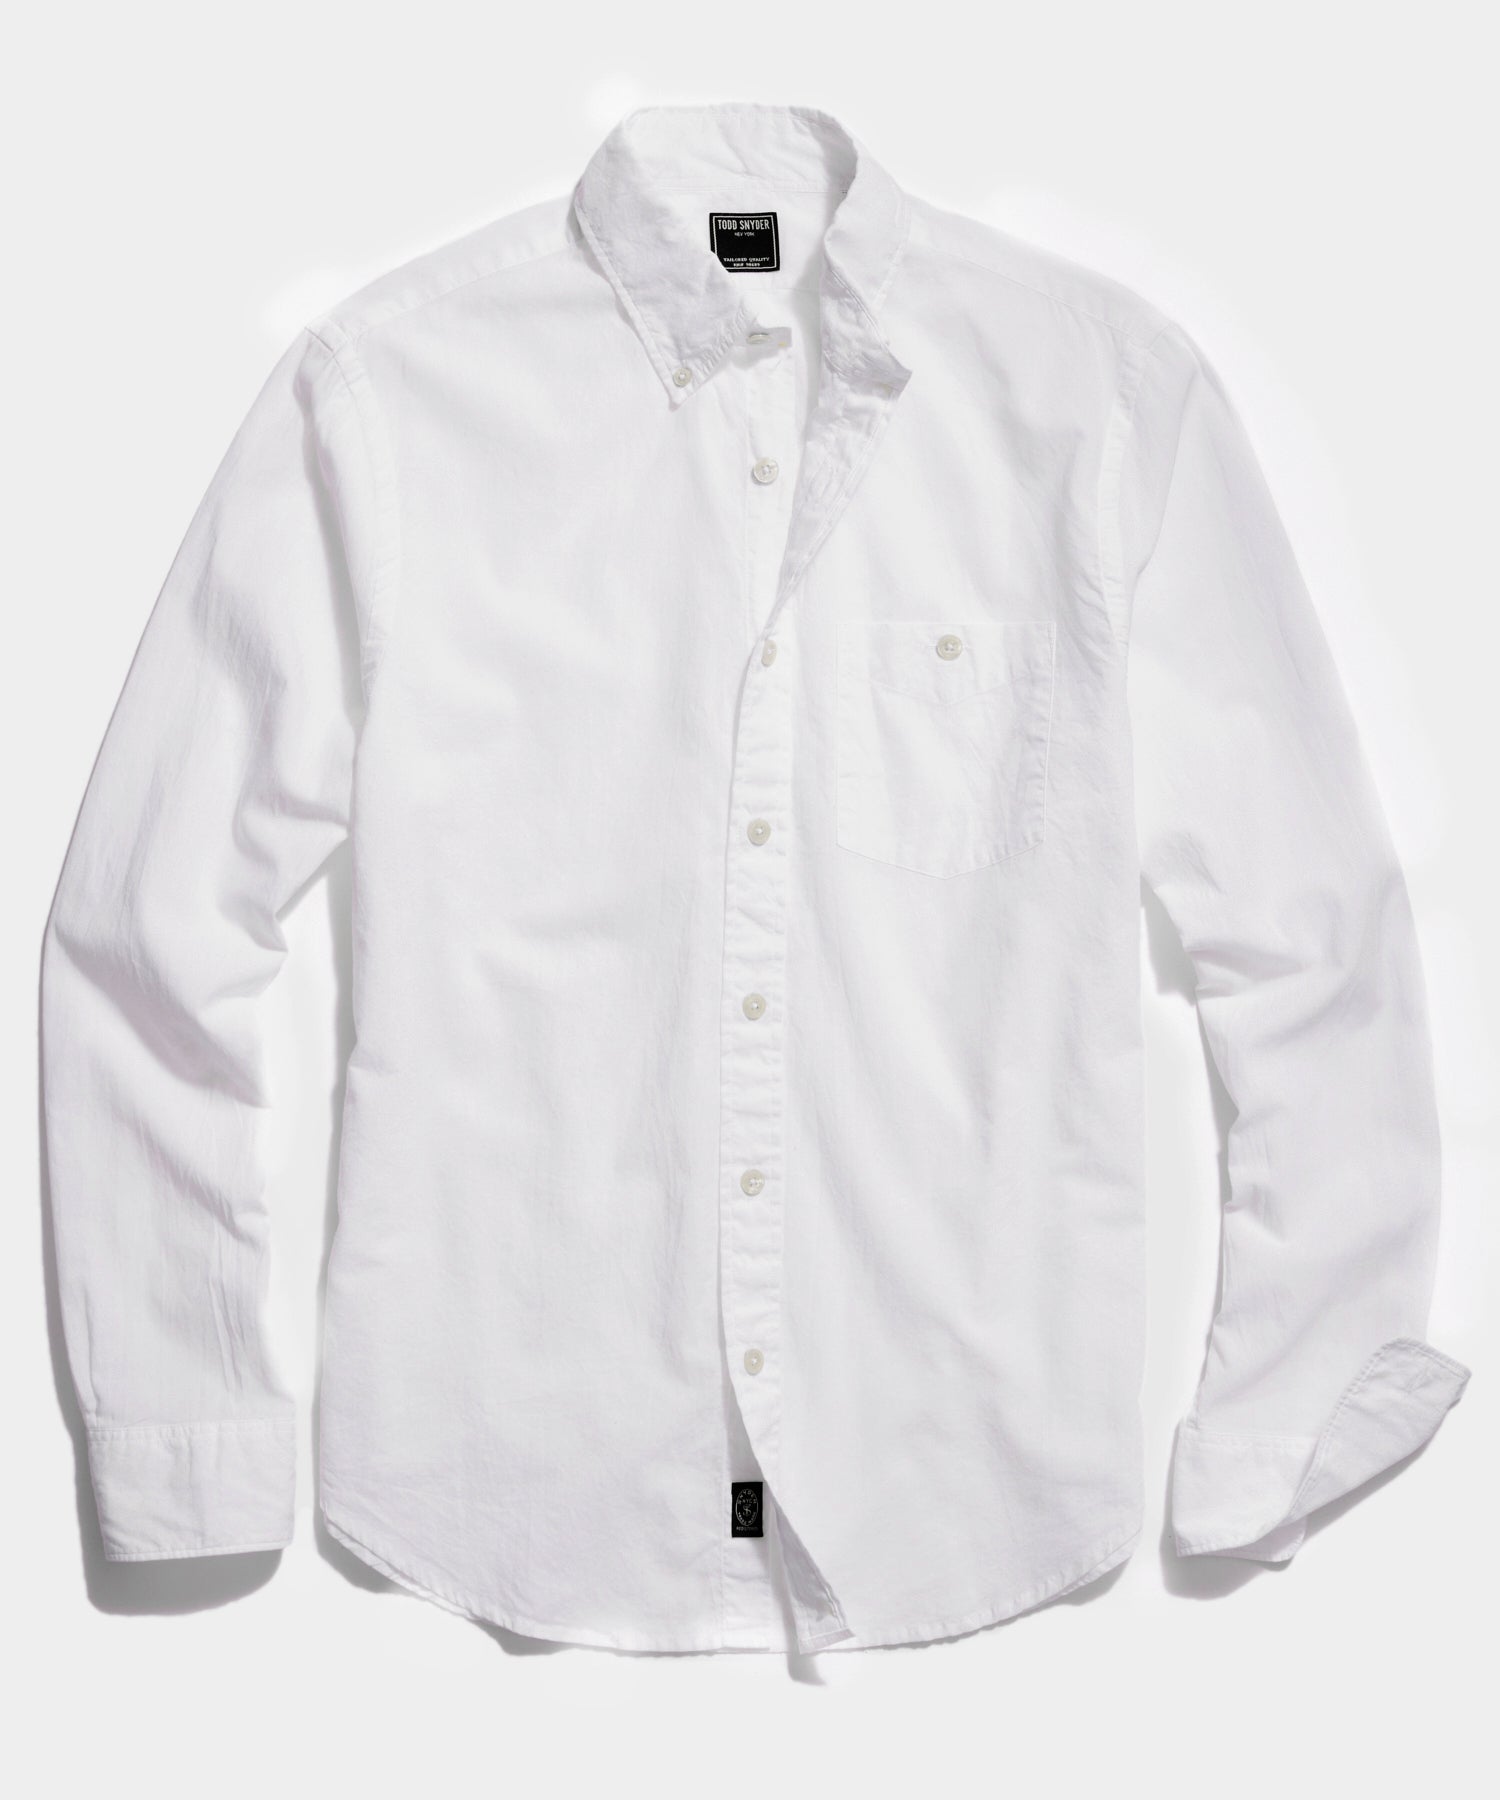 Todd Snyder Japanese Selvedge Oxford Button Down Shirt in White